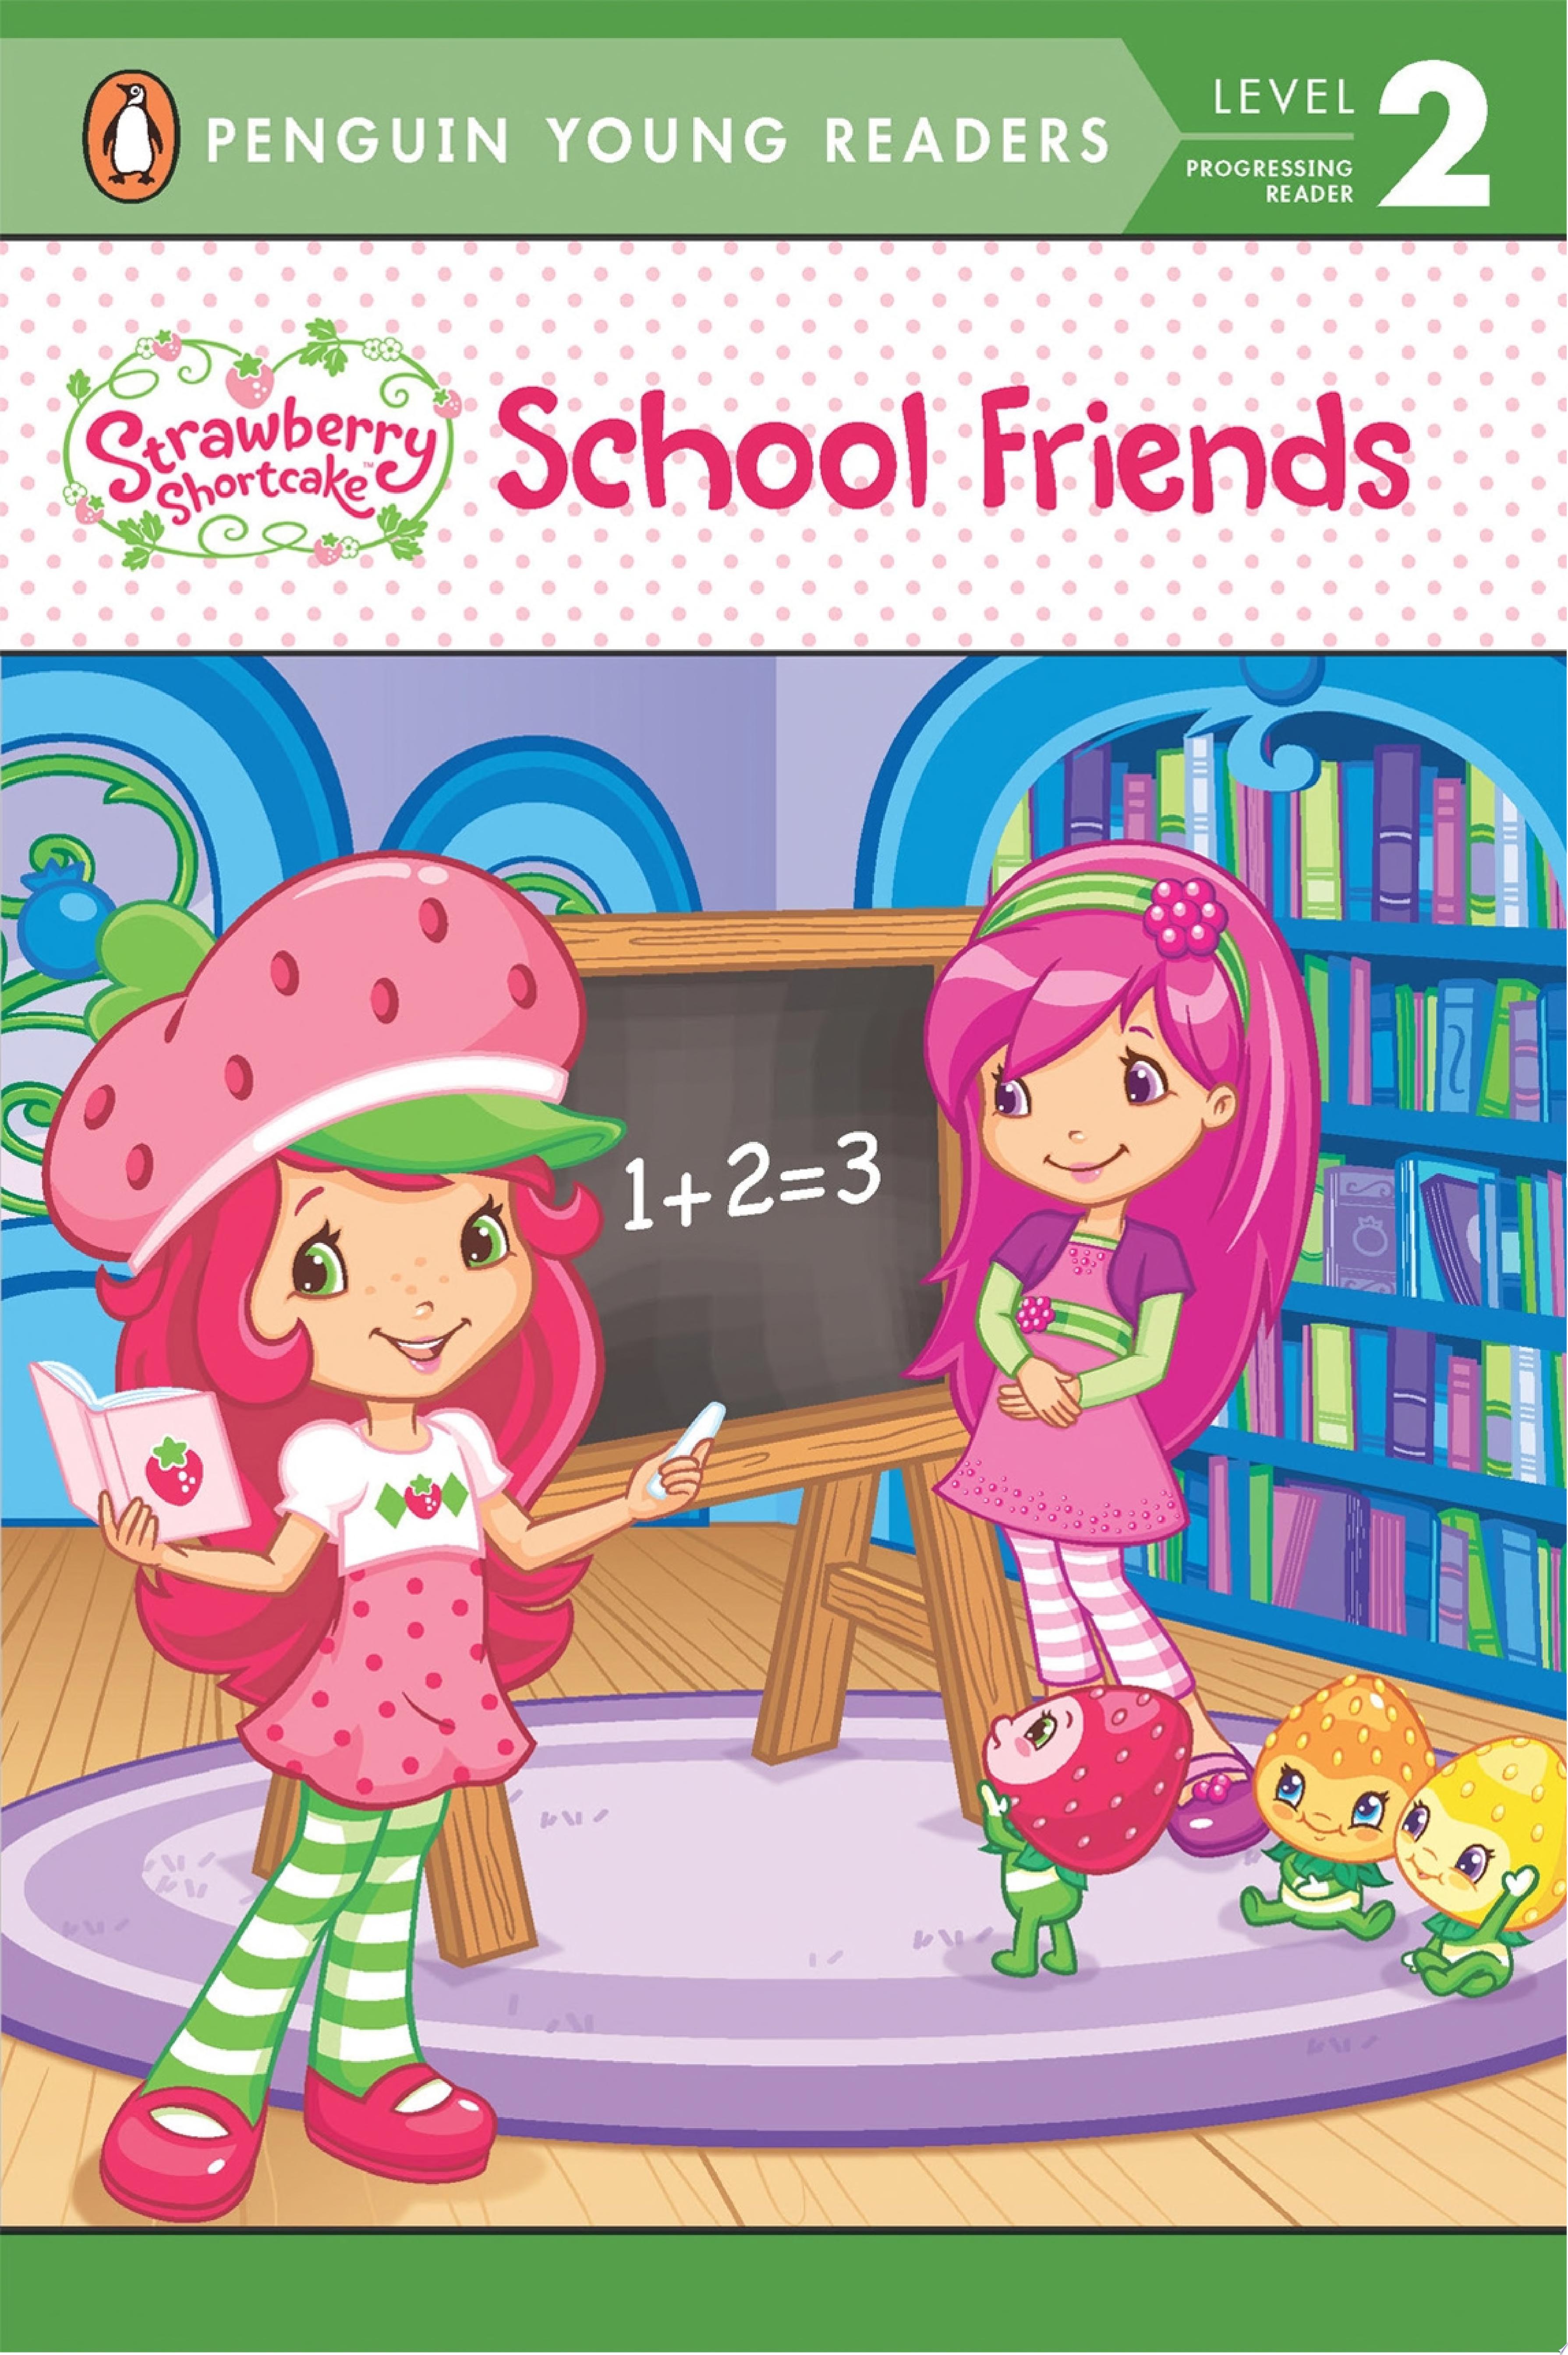 Image for "School Friends"